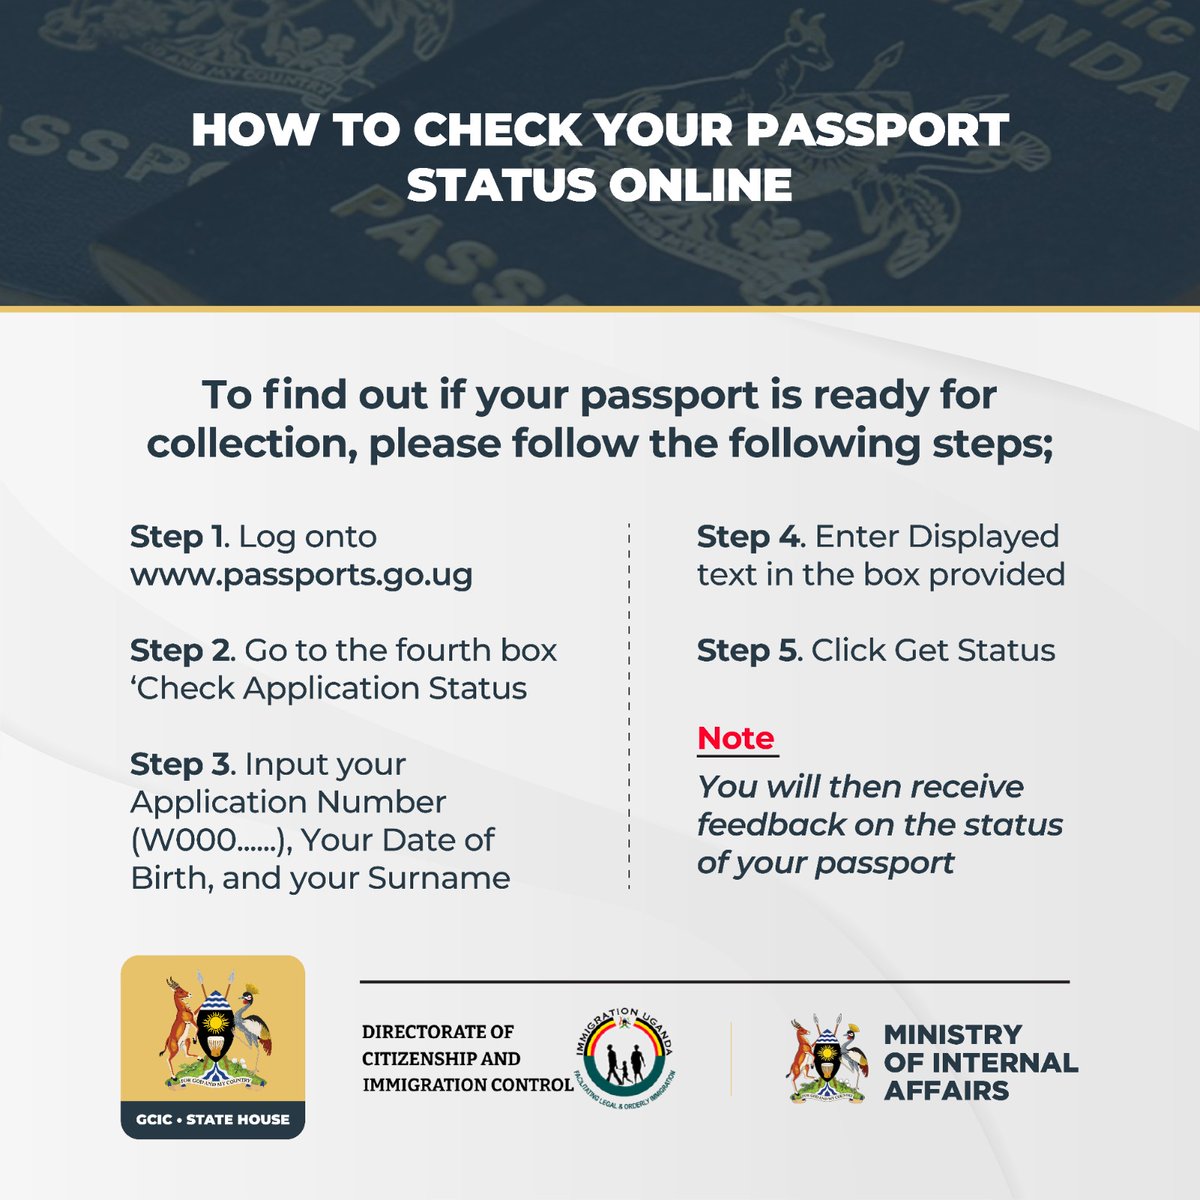 This is how a Passport applicant can 𝐞𝐚𝐬𝐢𝐥𝐲 𝐂𝐇𝐄𝐂𝐊/𝐅𝐈𝐍𝐃 𝐎𝐔𝐓 𝐓𝐇𝐄𝐈𝐑 𝐏𝐀𝐒𝐒𝐏𝐎𝐑𝐓 𝐒𝐓𝐀𝐓𝐔𝐒 𝐎𝐍𝐋𝐈𝐍𝐄 𝐅𝐑𝐎𝐌 passports.go.ug ; And know if it is ready for collection or deferred without having to go to a Passport office